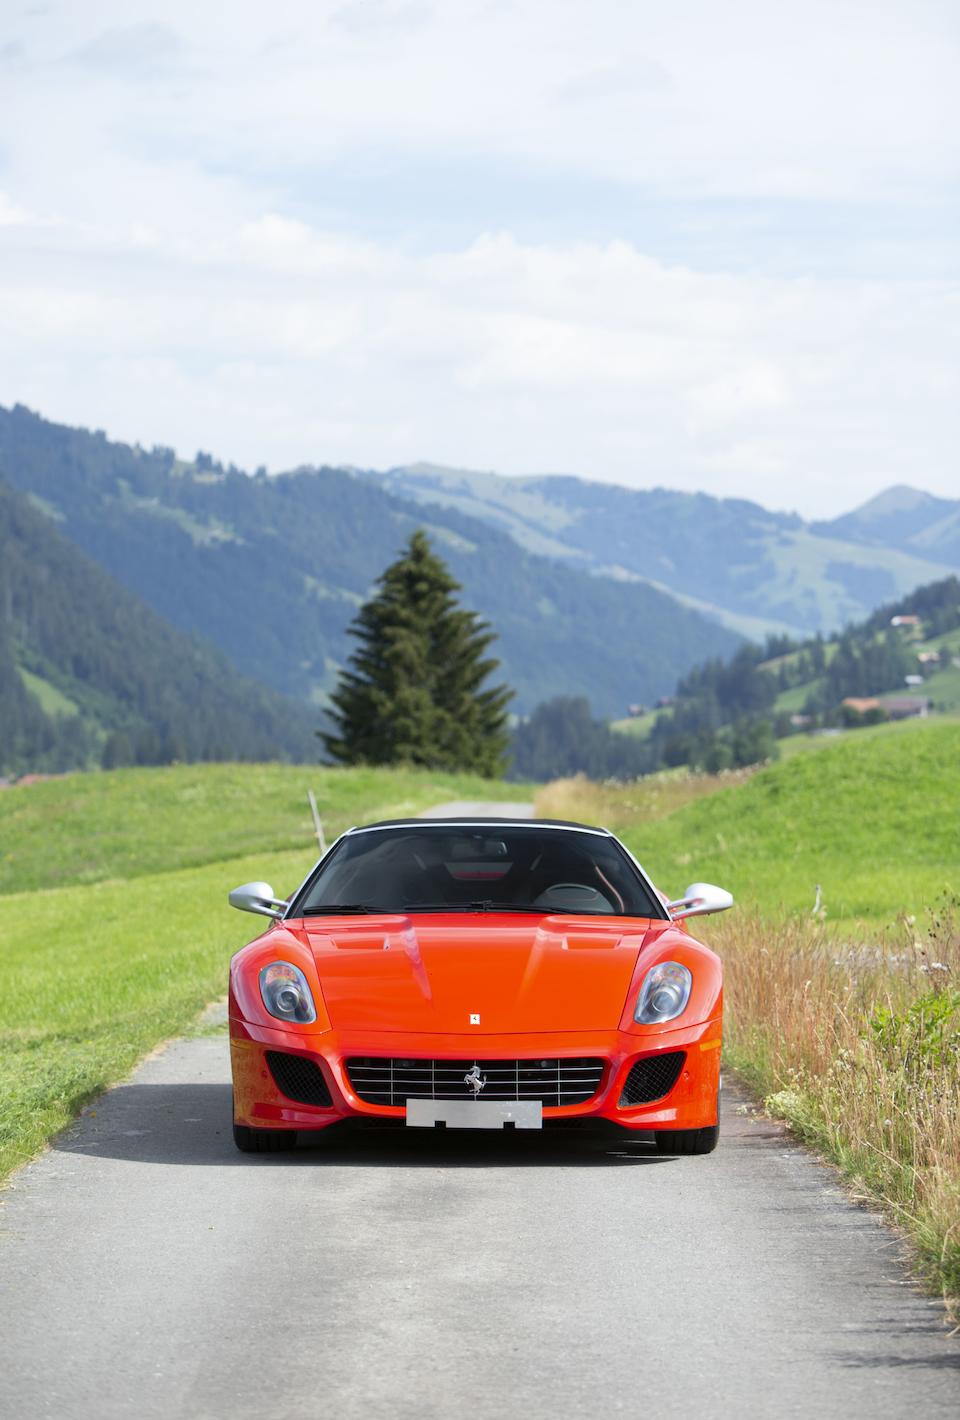 One of 80 built,2011 Ferrari  599 SA Aperta with Factory Hardtop  Chassis no. ZFF72RDT3B0183755